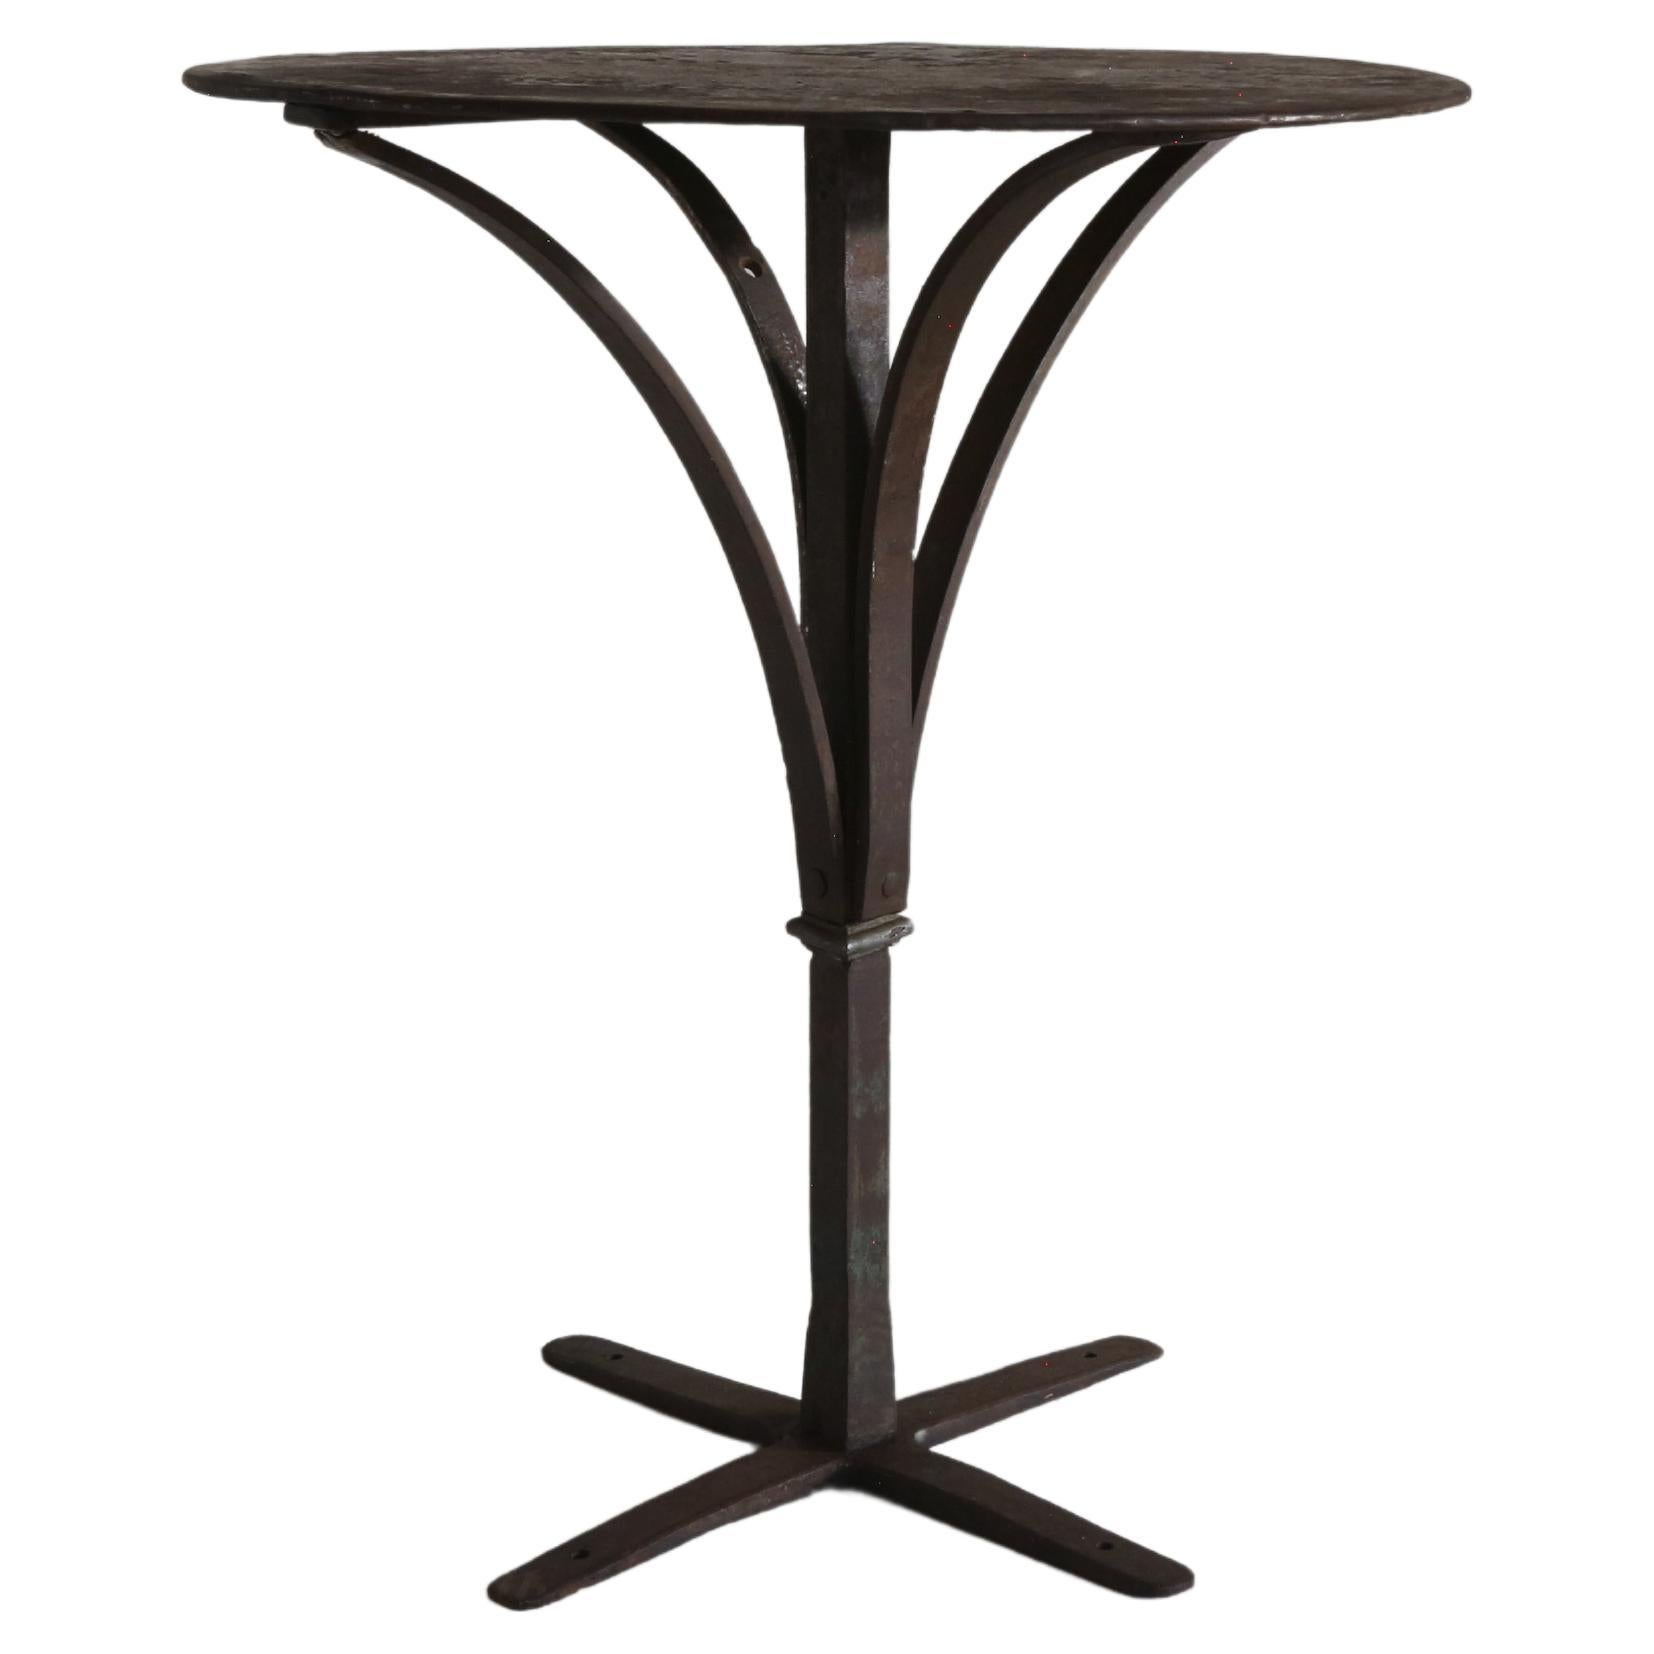 French Wrought Iron and Steel Bistro Table C1920s